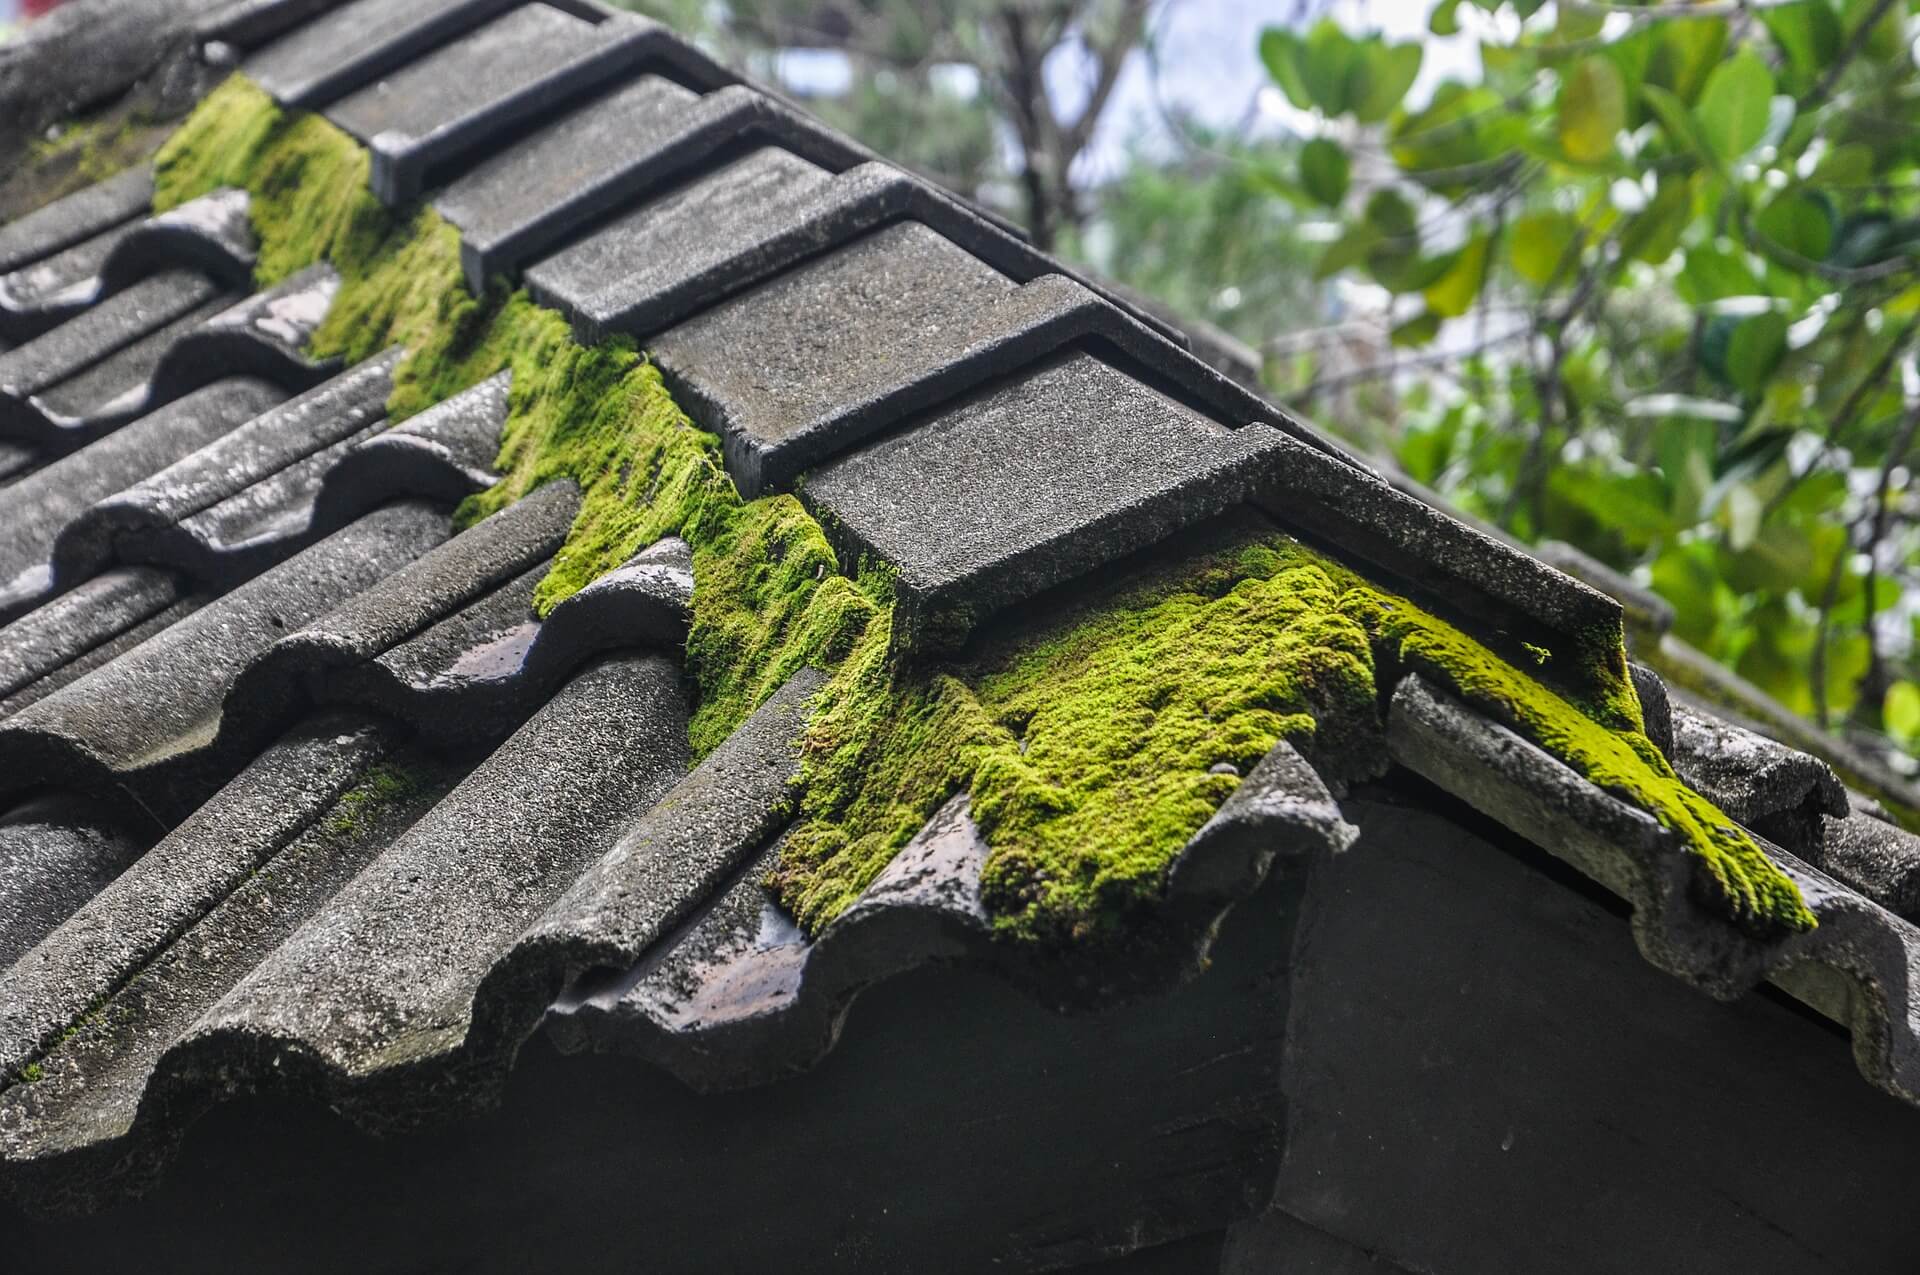 Tackling unsightly moss